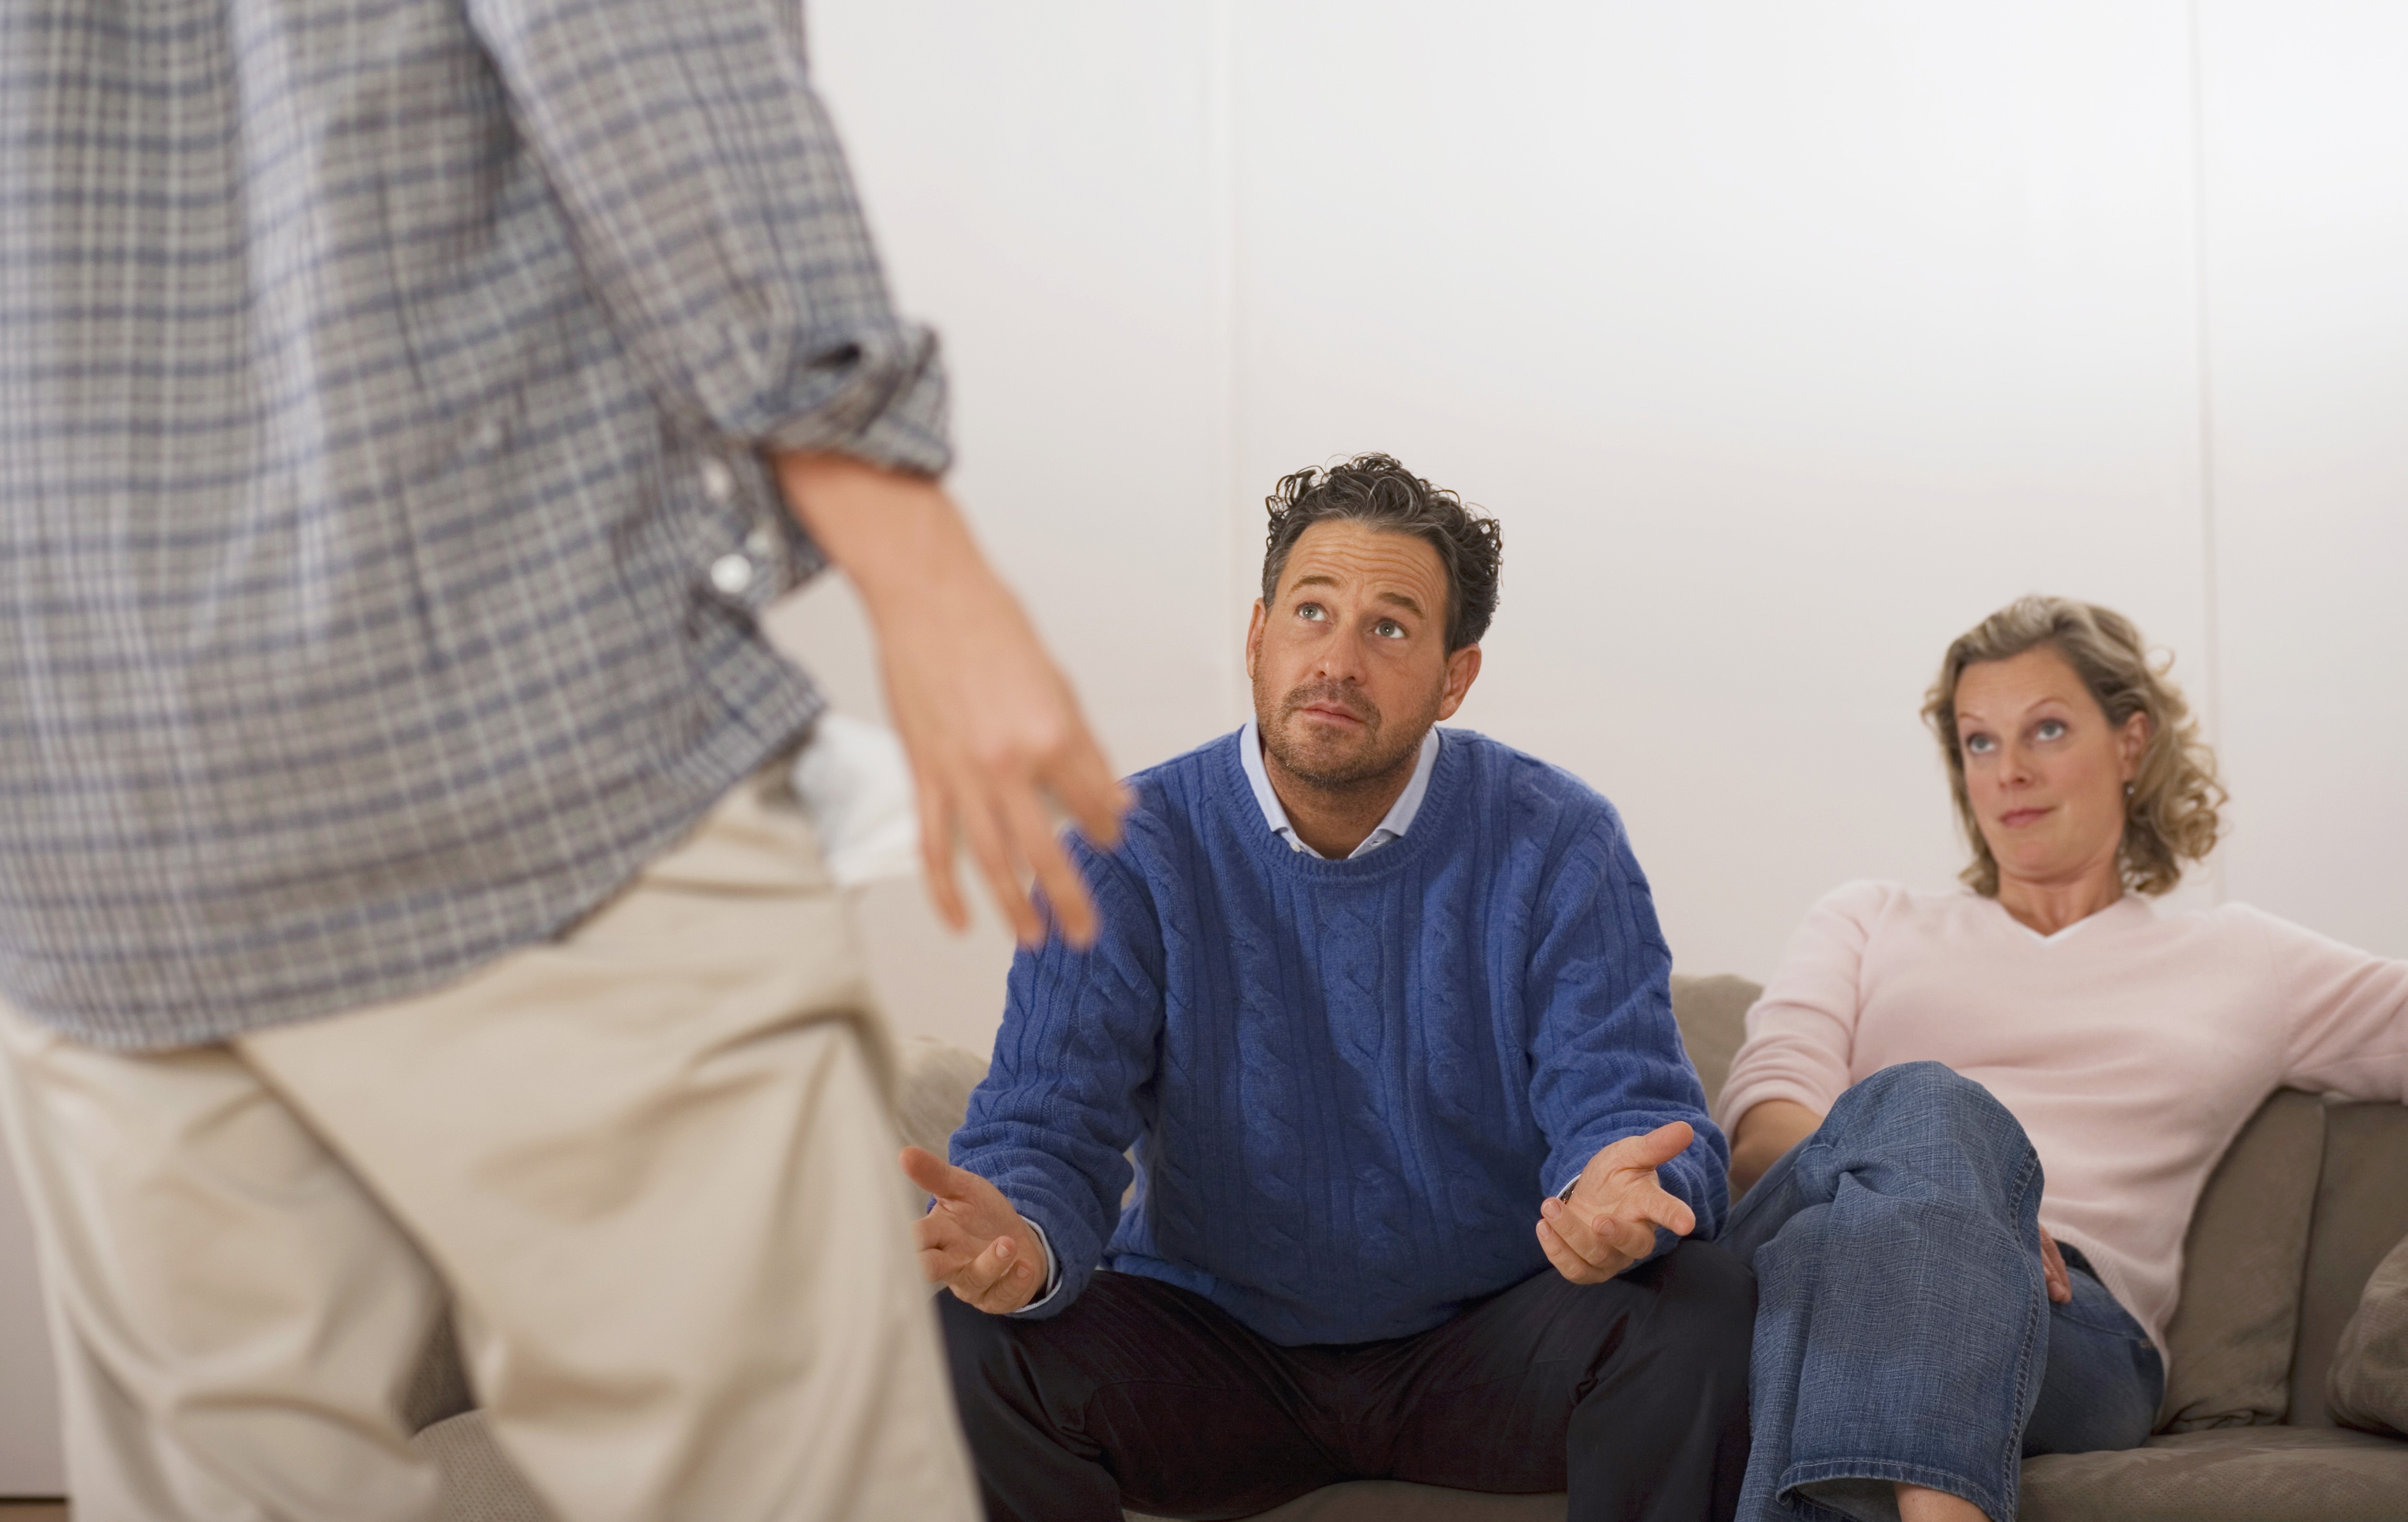 Man talking to parents | Source: Getty Images